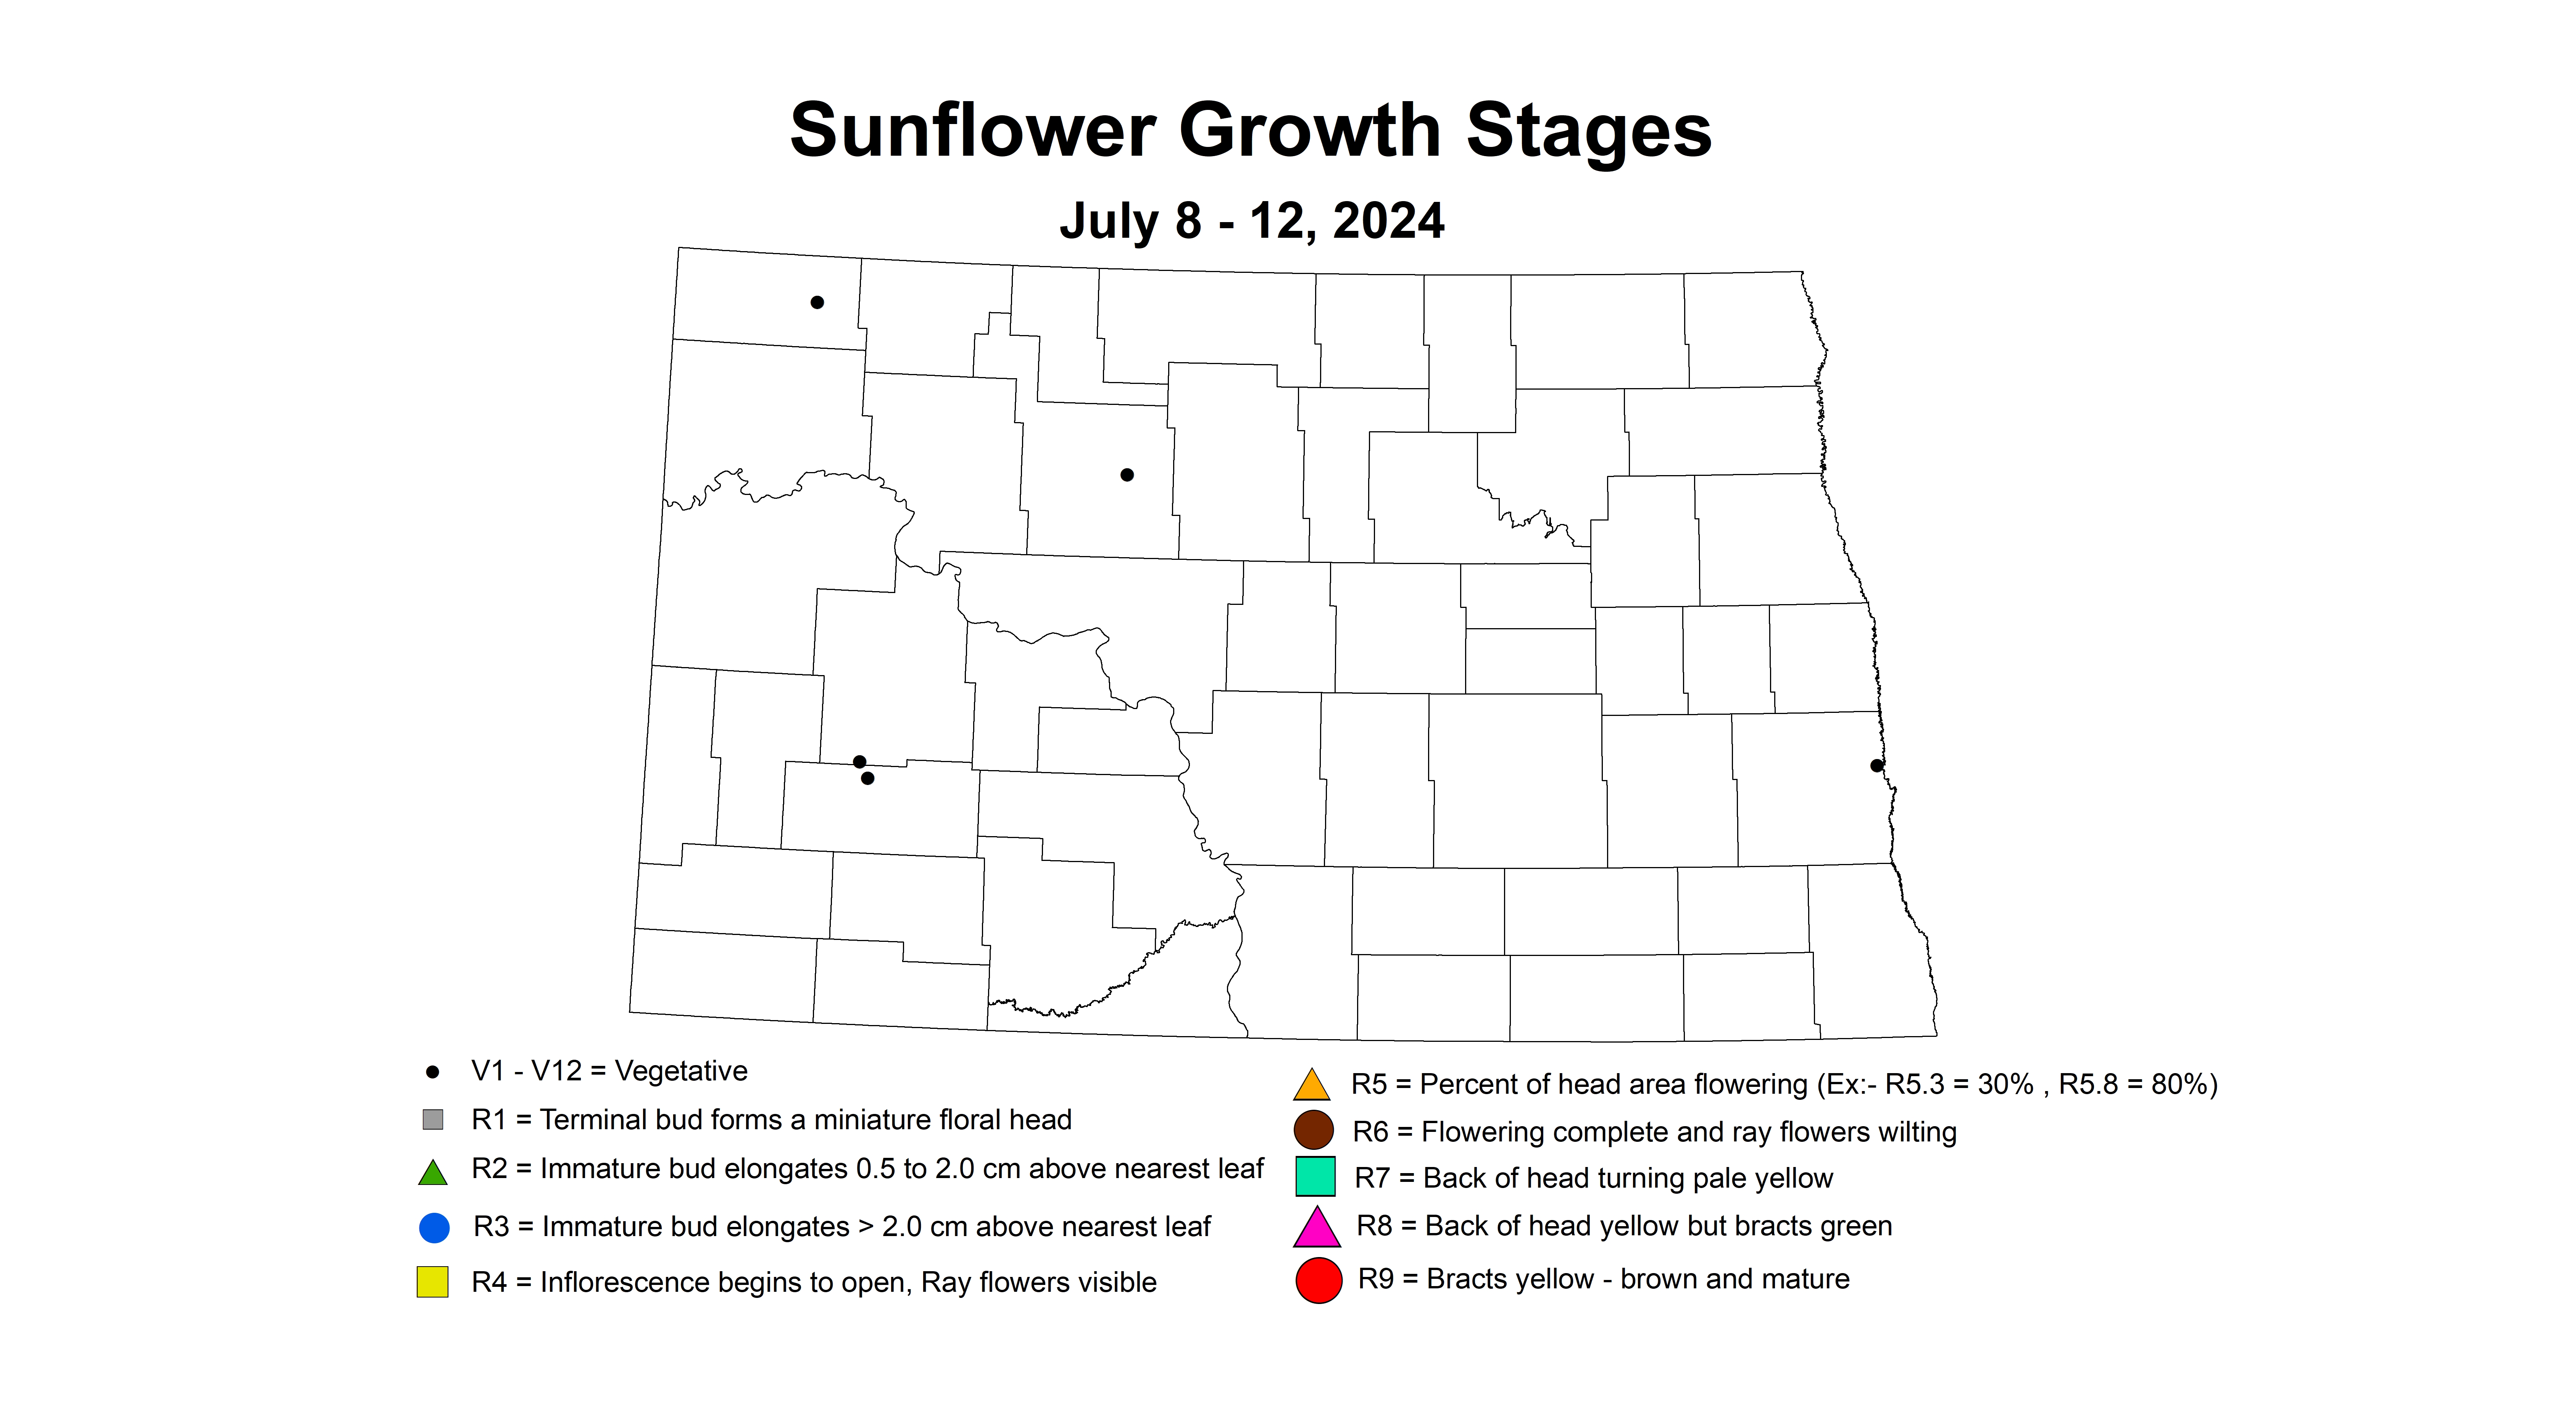 sunflower growth stages July 8 - 12 2024